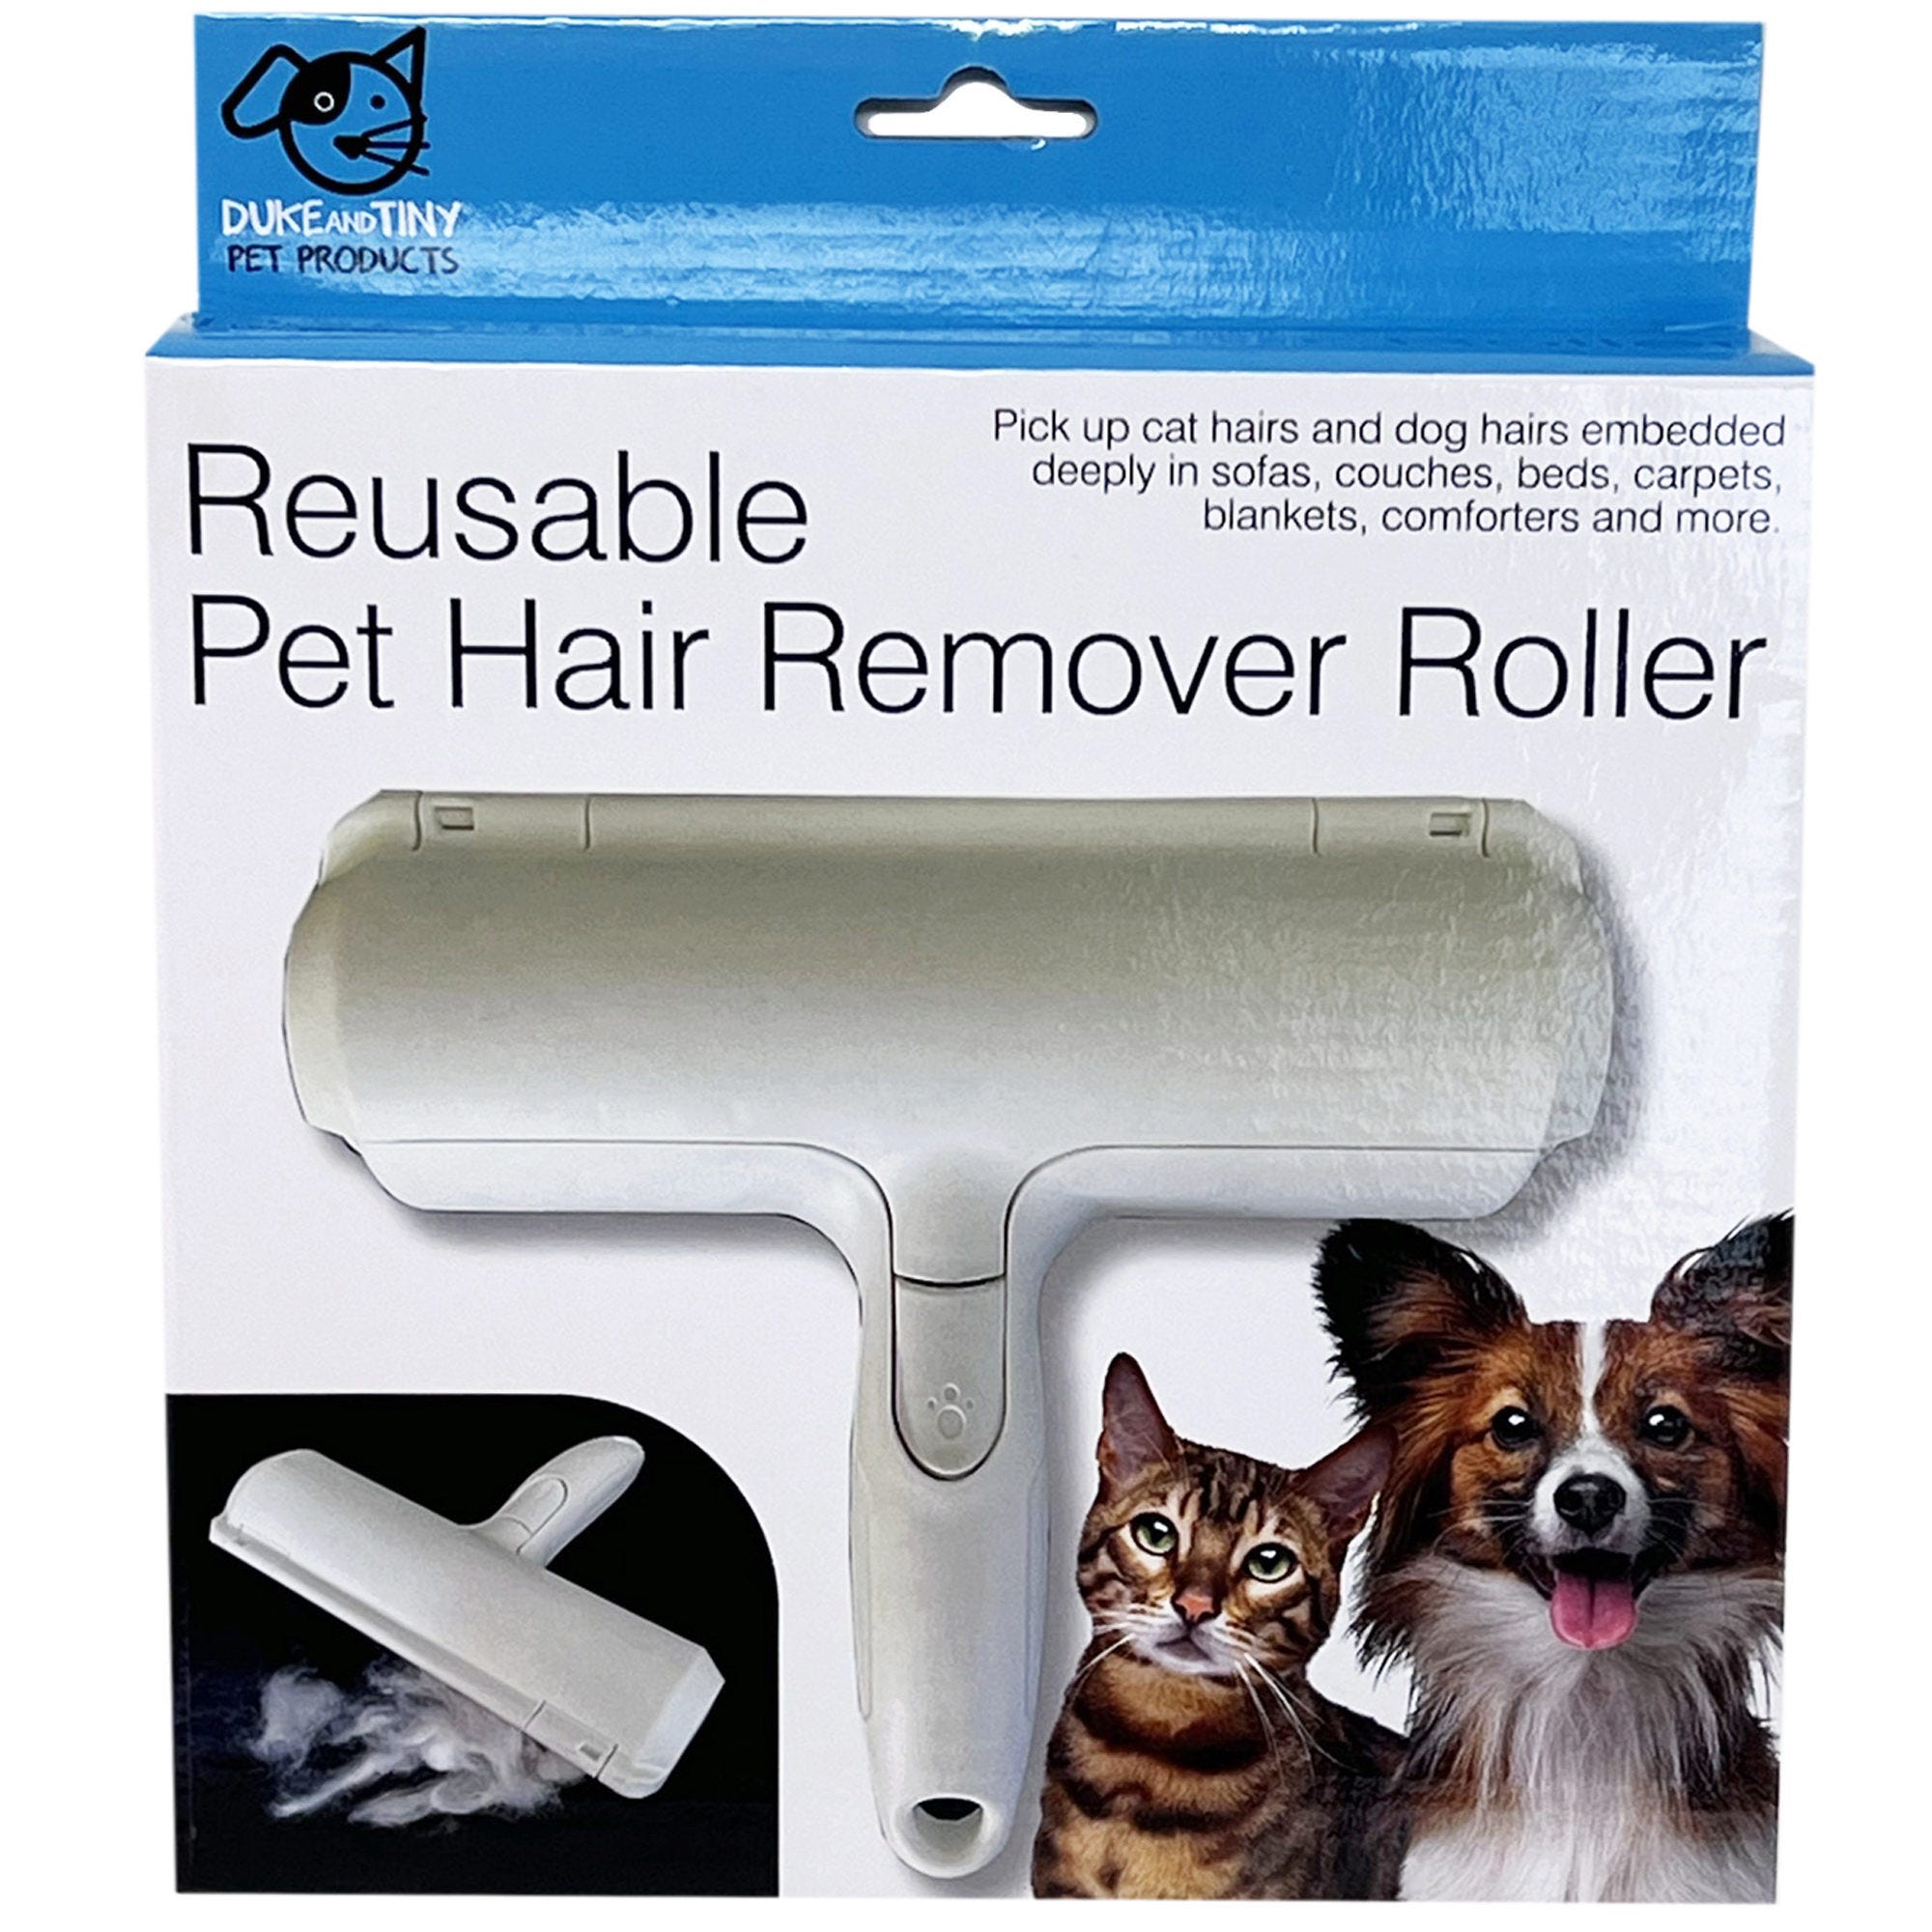 Reusable Pet Hair Remover Roller - Qty 6